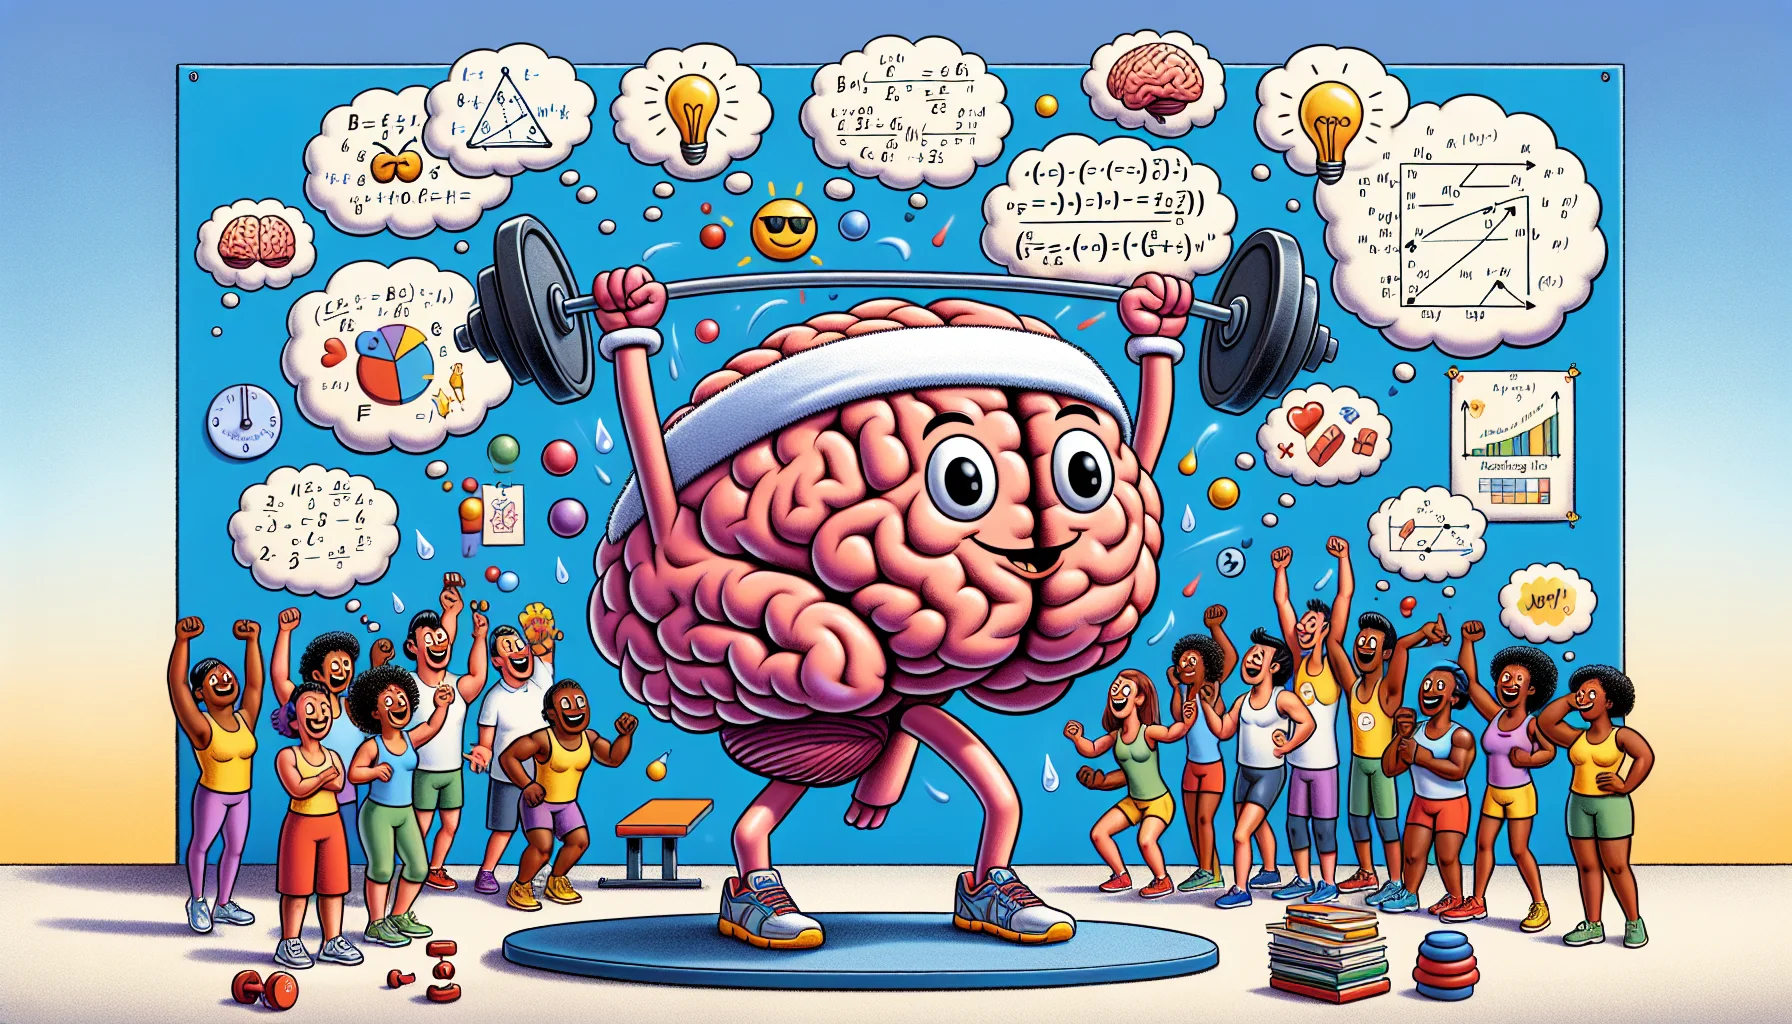 Generate an image that portrays a humorous and engaging scenario around the concept of brain enhancement. Picture a scene where a large human brain is joyfully lifting weights, symbolizing exercise. This brain is wearing a sweatband and has an expression of determination. There are thought bubbles around it showing it successfully solving complex mathematical equations and creative ideas, representing the 'Geniux' effect. Around this, enthusiastic bystanders of different genders and descents, such as a Hispanic woman, an African man, and an Asian person, are cheering it on. Text at the top of the image reads 'Geniux: Separating Fact from Fiction in Brain Enhancement'. The overall tone of the image is light-hearted and motivational, encouraging viewers to engage in physical fitness for mental enhancement.